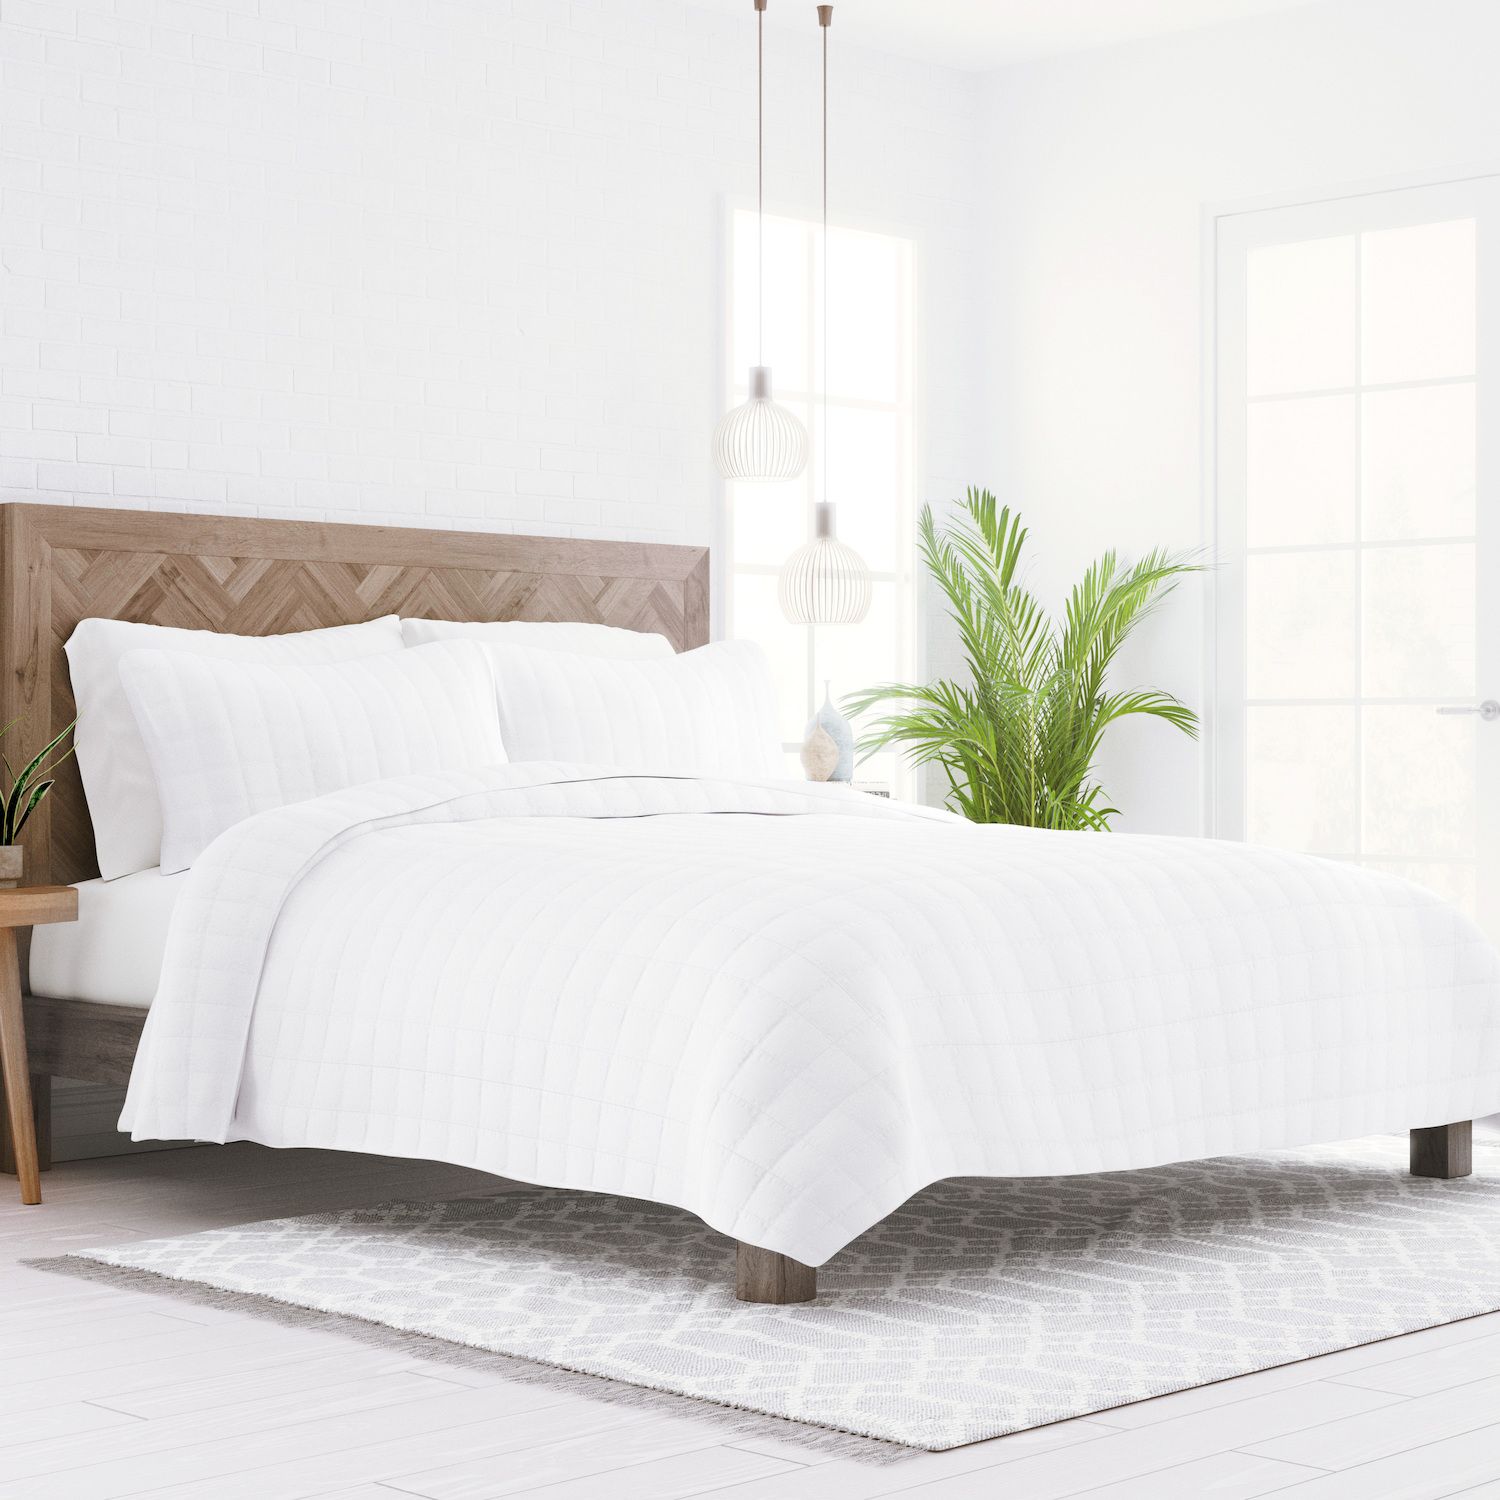 Image for Home Collection Premium Ultra Soft Square Pattern Quilted Coverlet Set at Kohl's.